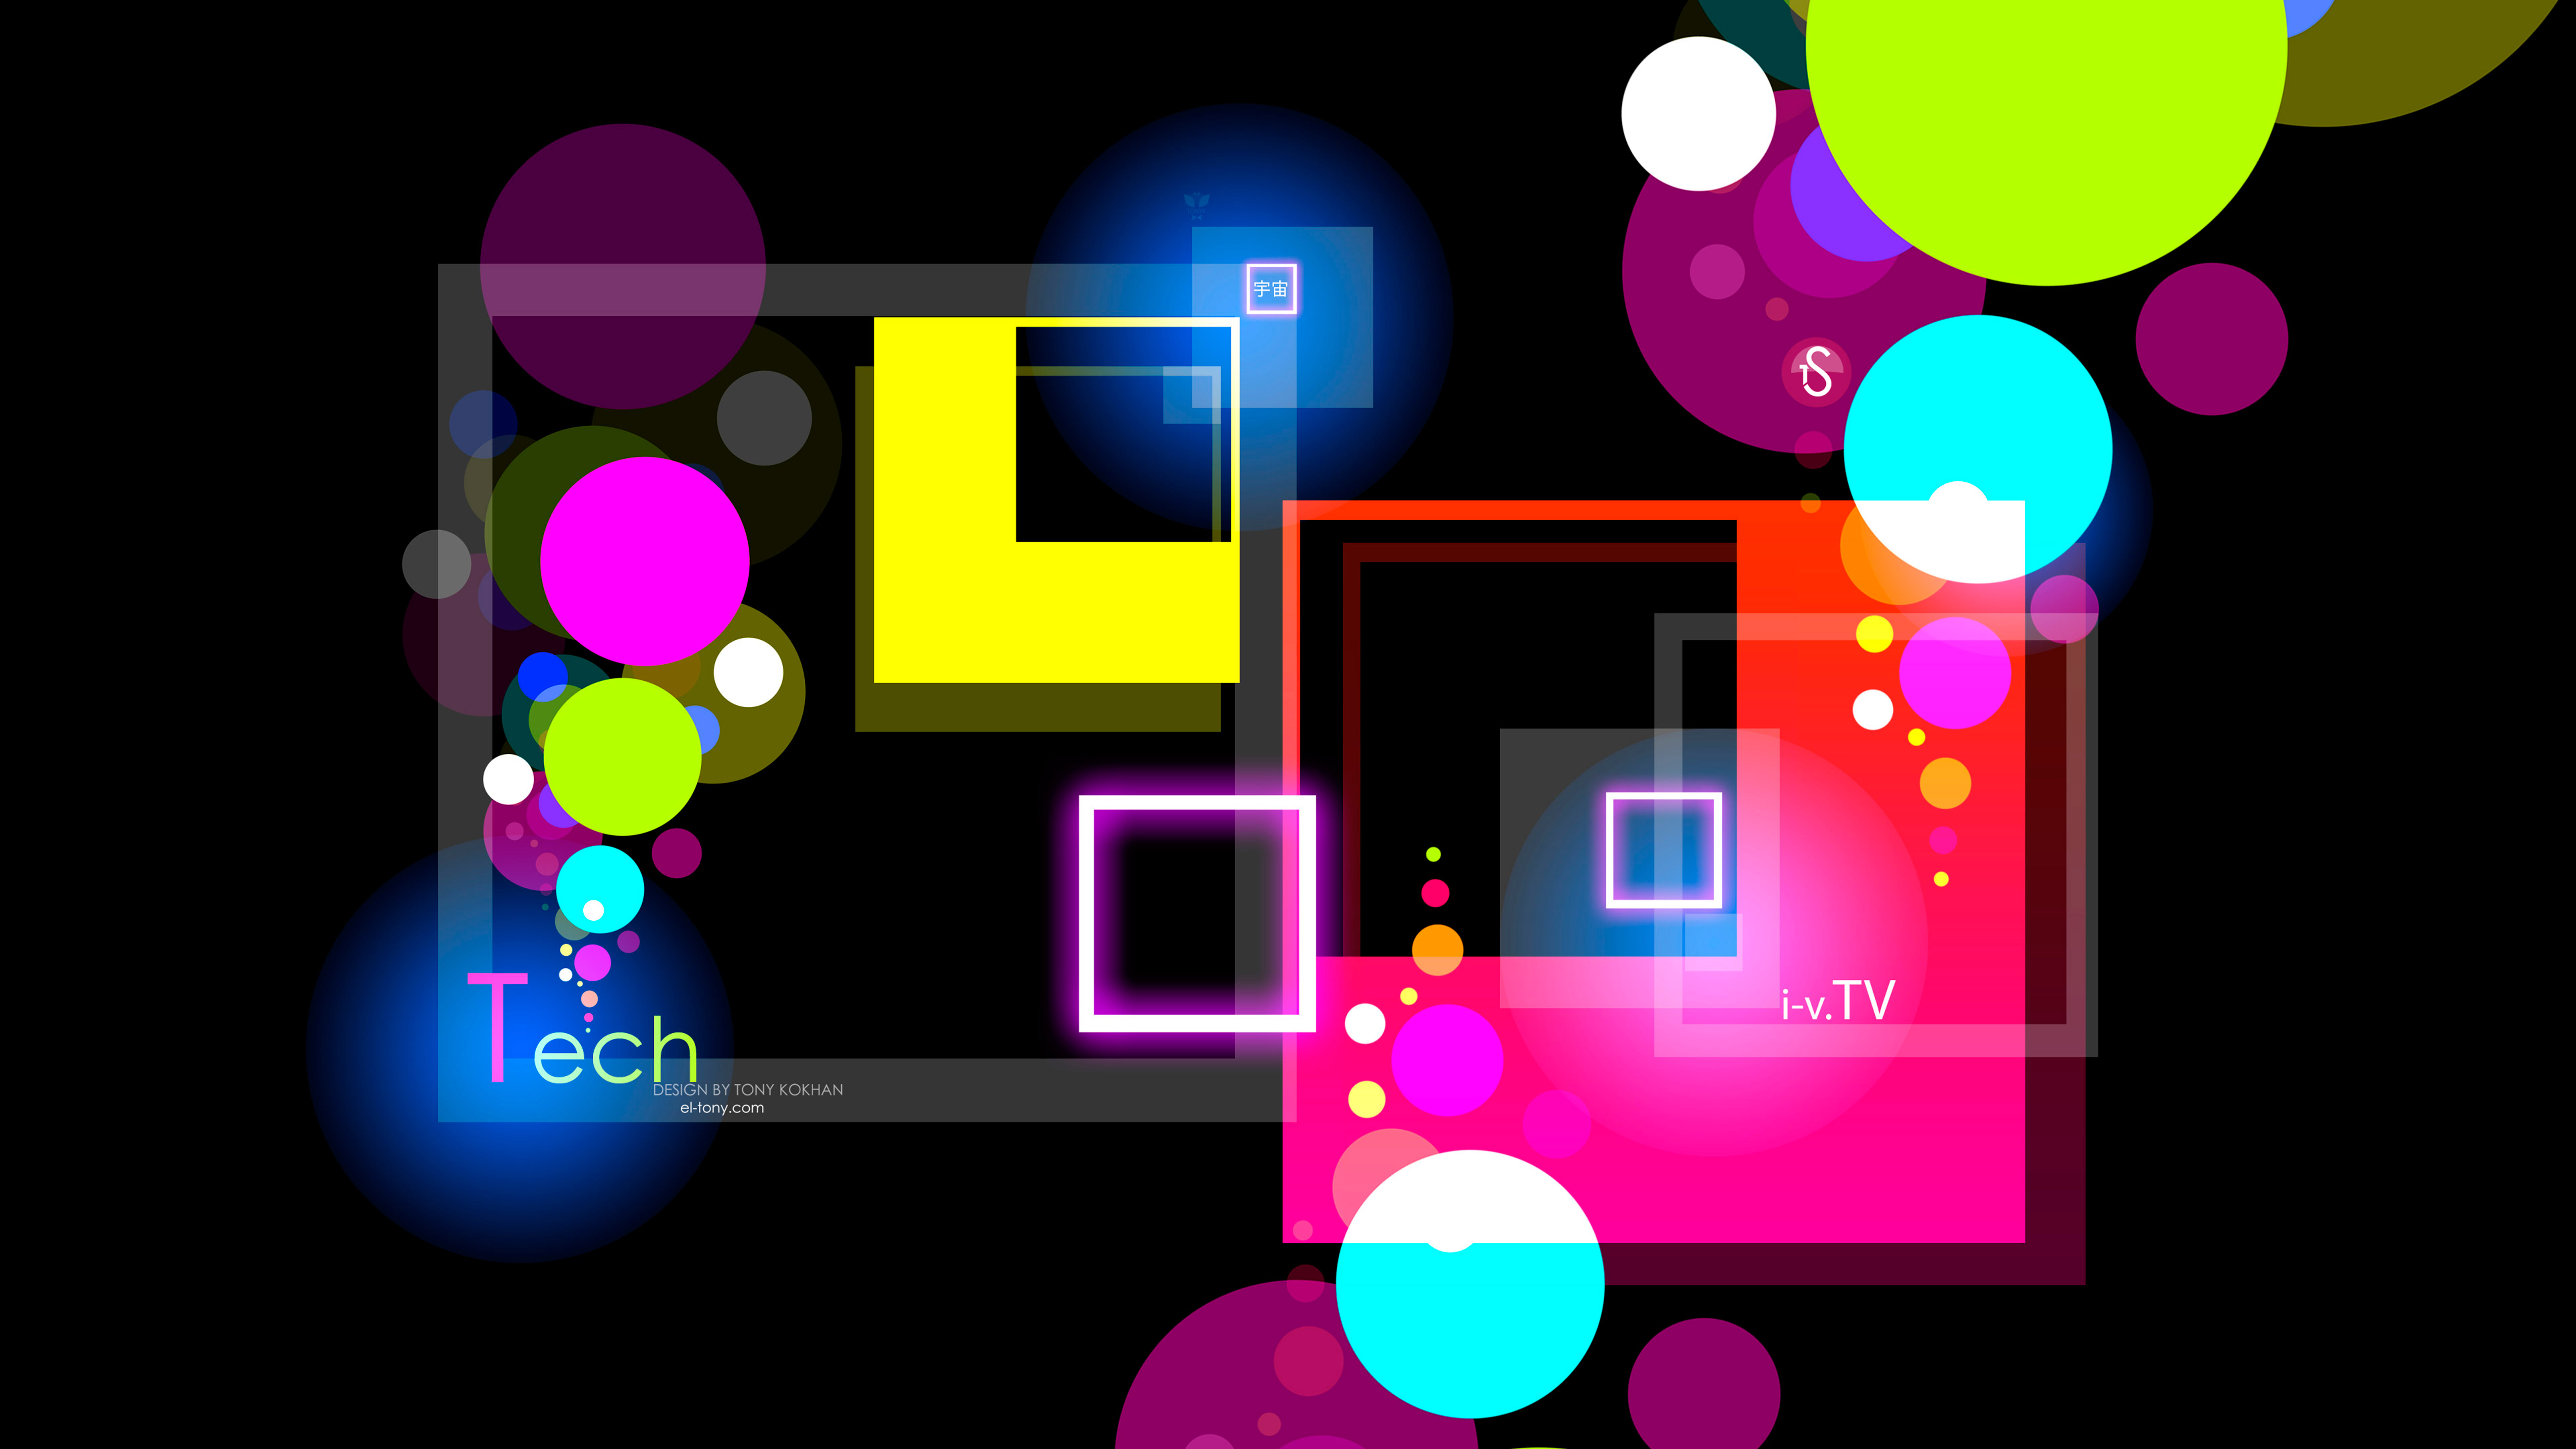 Tech-Live-Square-BoXxx2Ddit3Chcht-Abstract-Word-Style-TonysGgt-Creative-MiSscle2Ddit